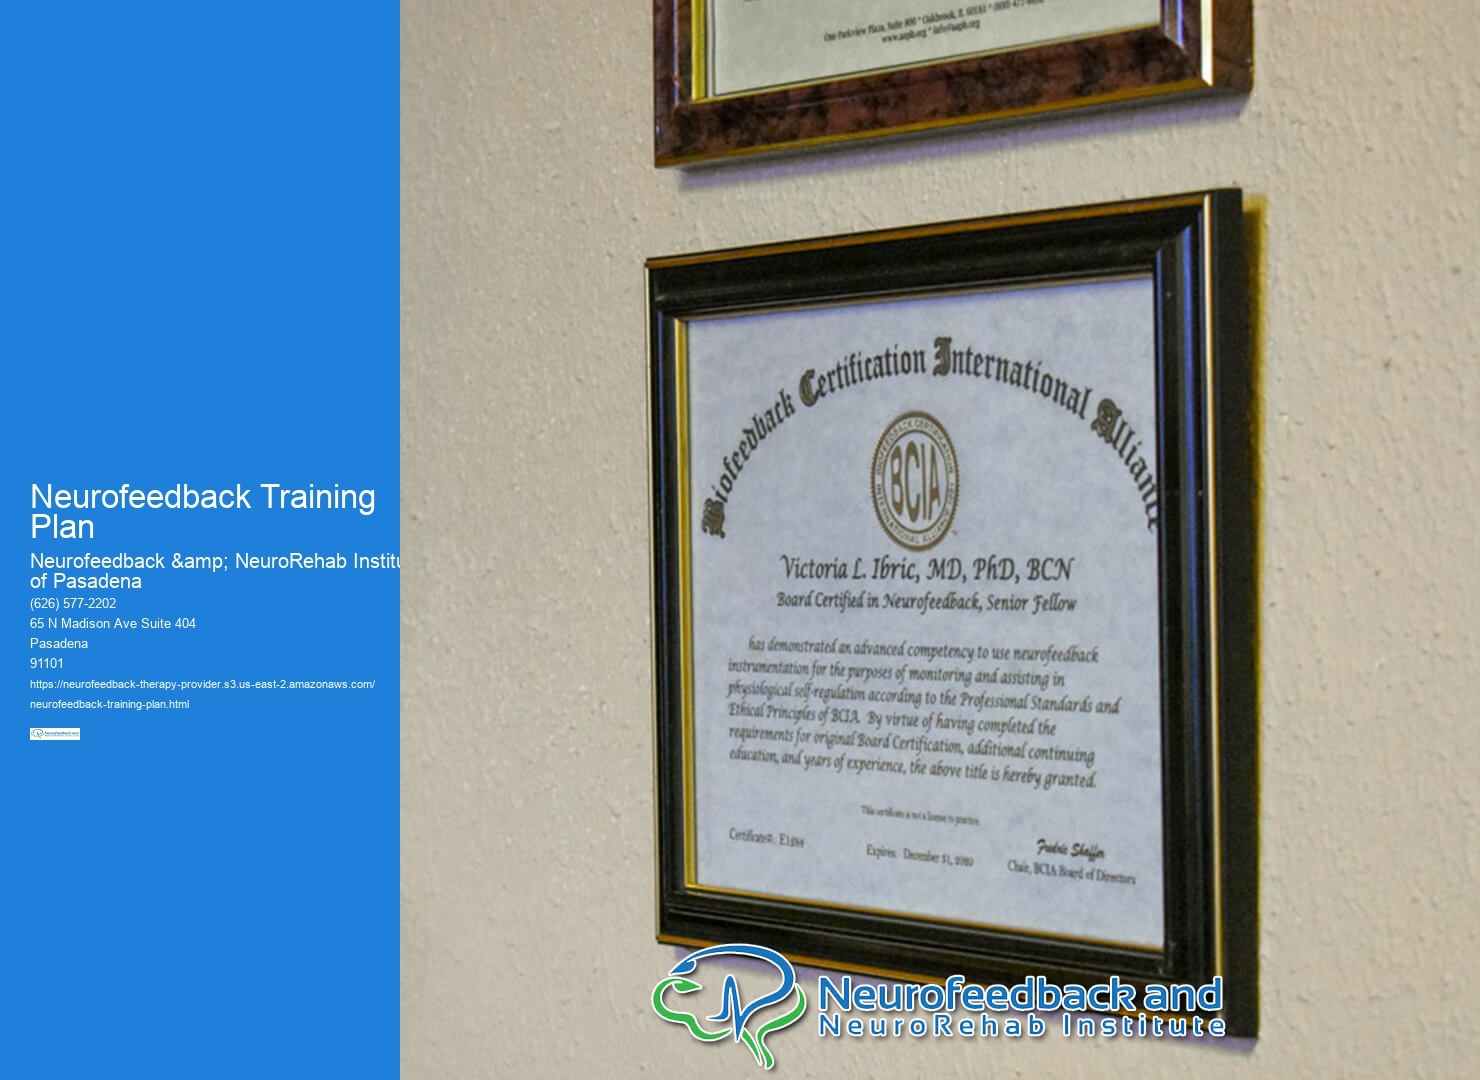 How does neurofeedback training support recovery and rehabilitation after traumatic brain injury (TBI)?